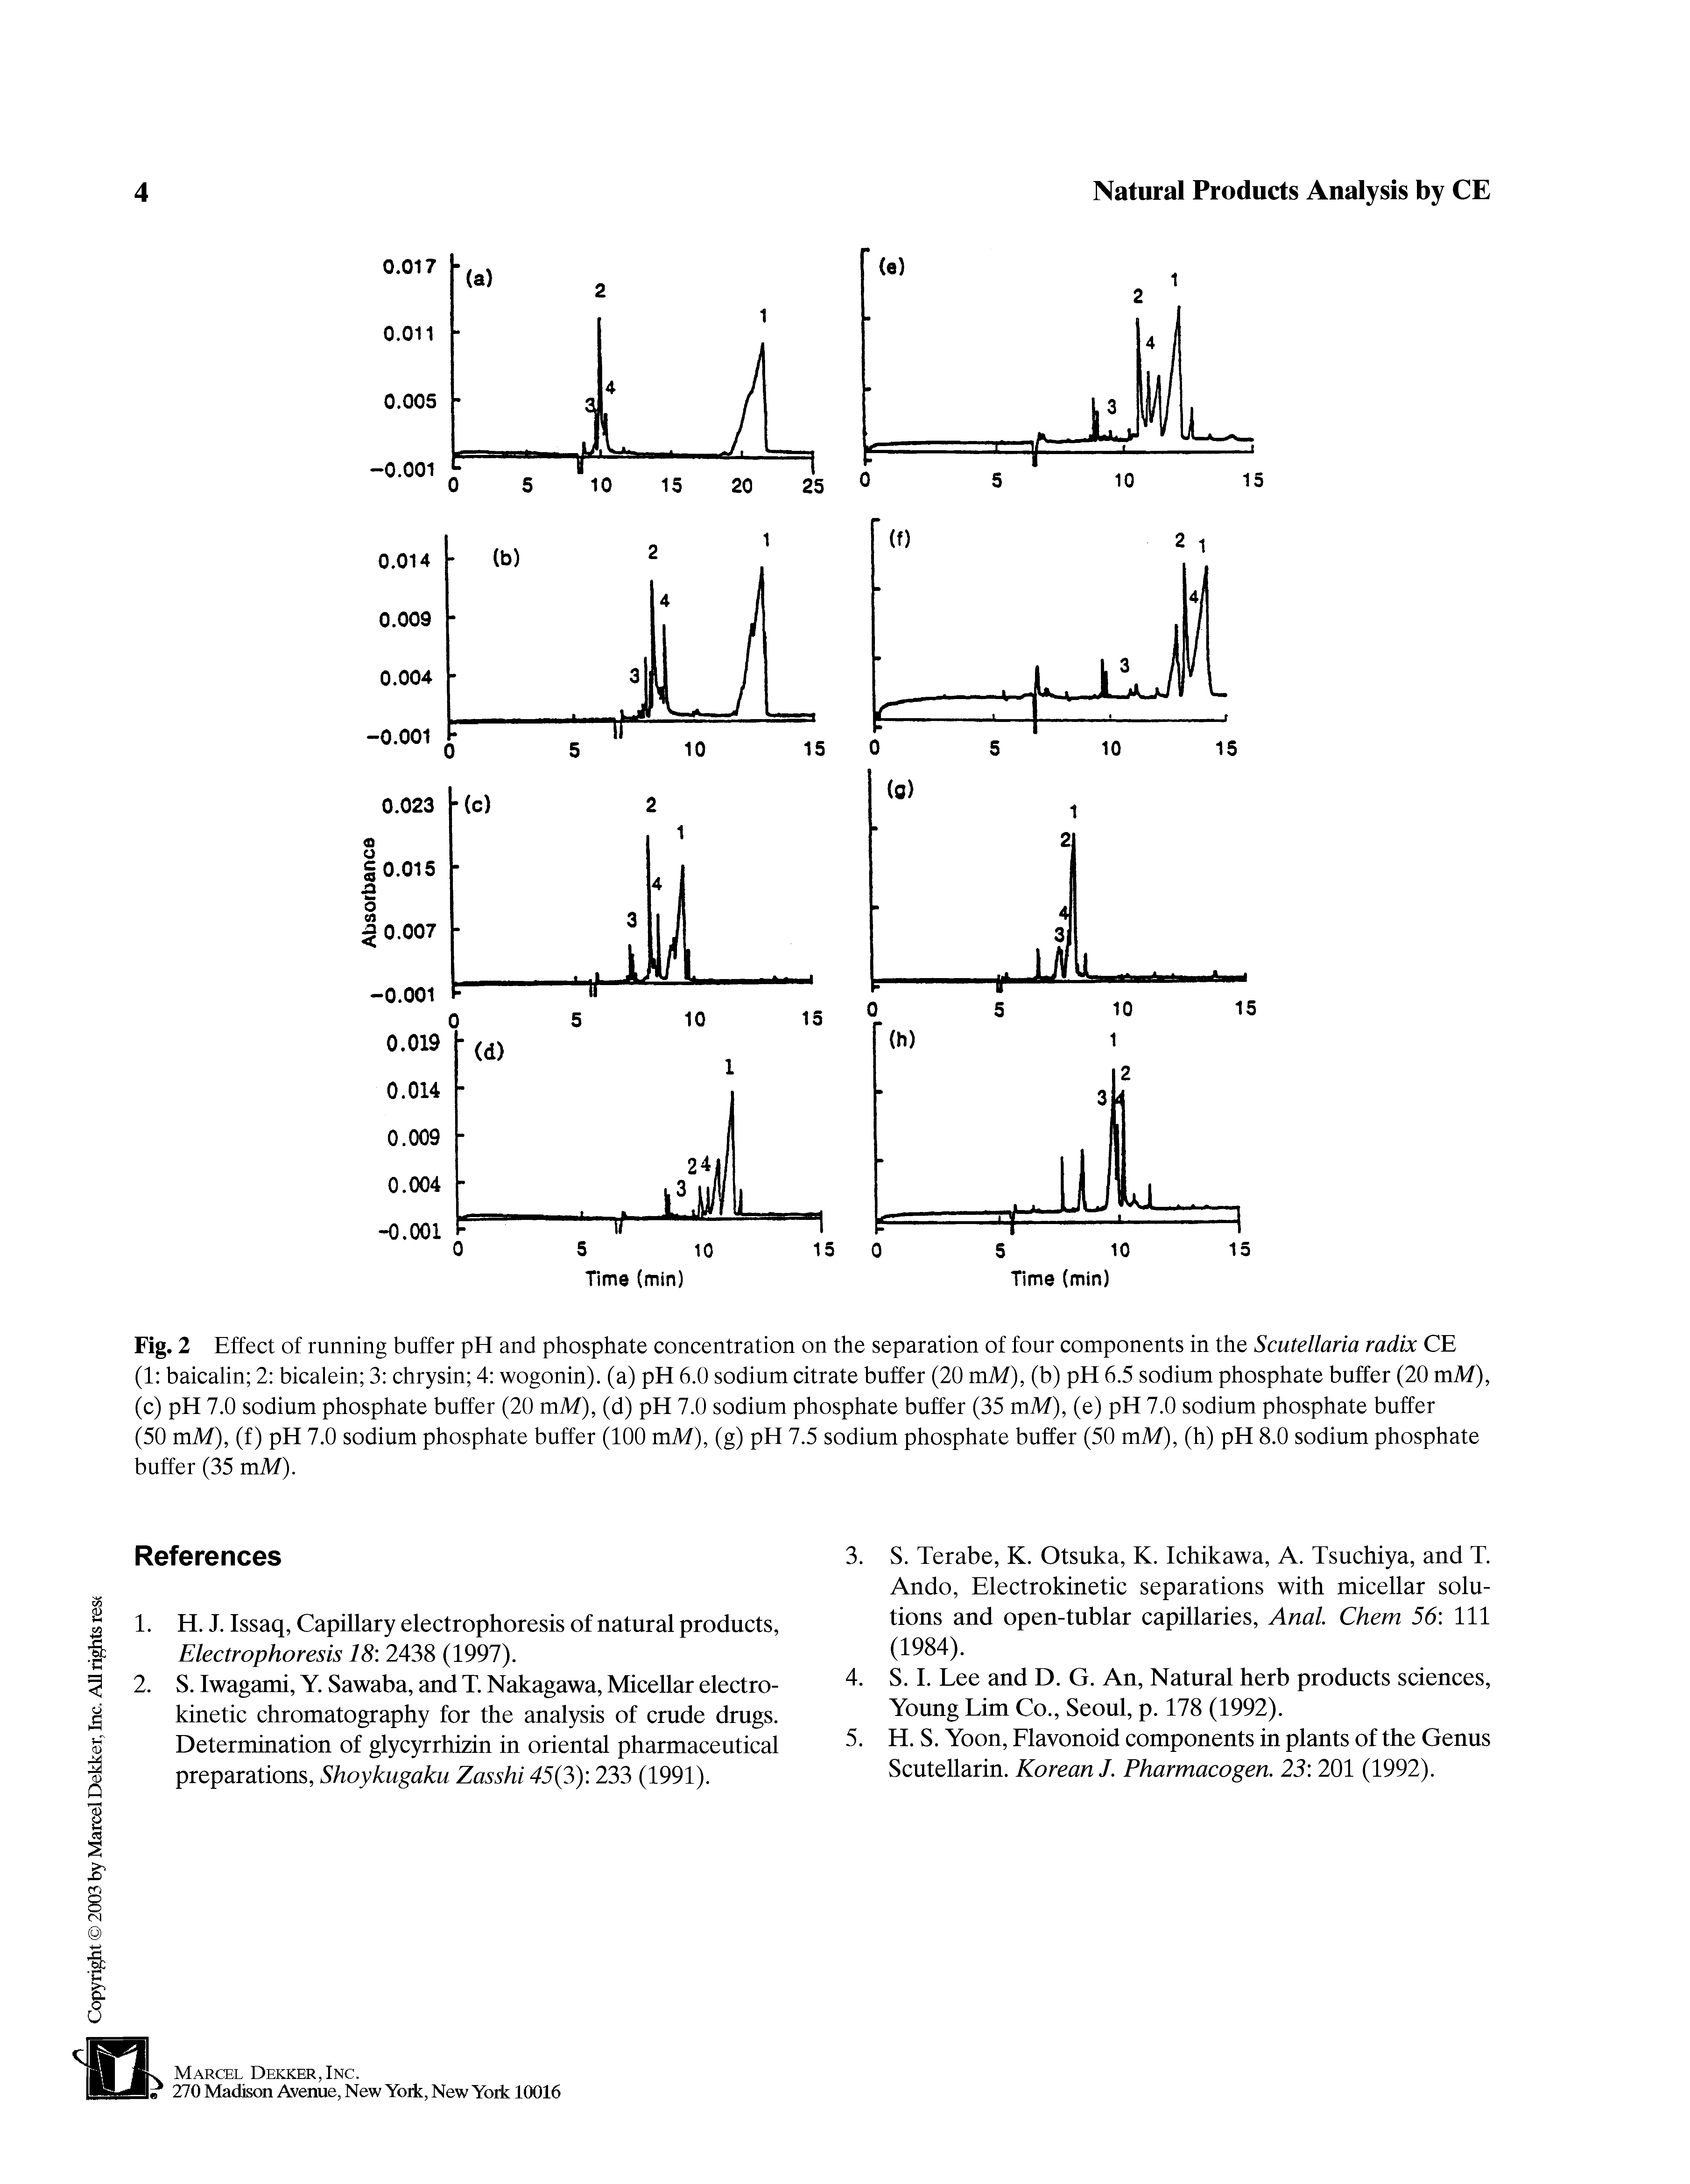 Fig. 2 Effect of running buffer pH and phosphate concentration on the separation of four components in the Scutellaria radix CE (1 baicalin 2 bicalein 3 chrysin 4 wogonin). (a) pH 6.0 sodium citrate buffer (20 mM), (b) pH 6.5 sodium phosphate buffer (20 mM), (c) pH 7.0 sodium phosphate buffer (20 mM), (d) pH 7.0 sodium phosphate buffer (35 mM), (e) pH 7.0 sodium phosphate buffer (50 mM), (f) pH 7.0 sodium phosphate buffer (100 mM), (g) pH 7.5 sodium phosphate buffer (50 mM), (h) pH 8.0 sodium phosphate buffer (35 mM).